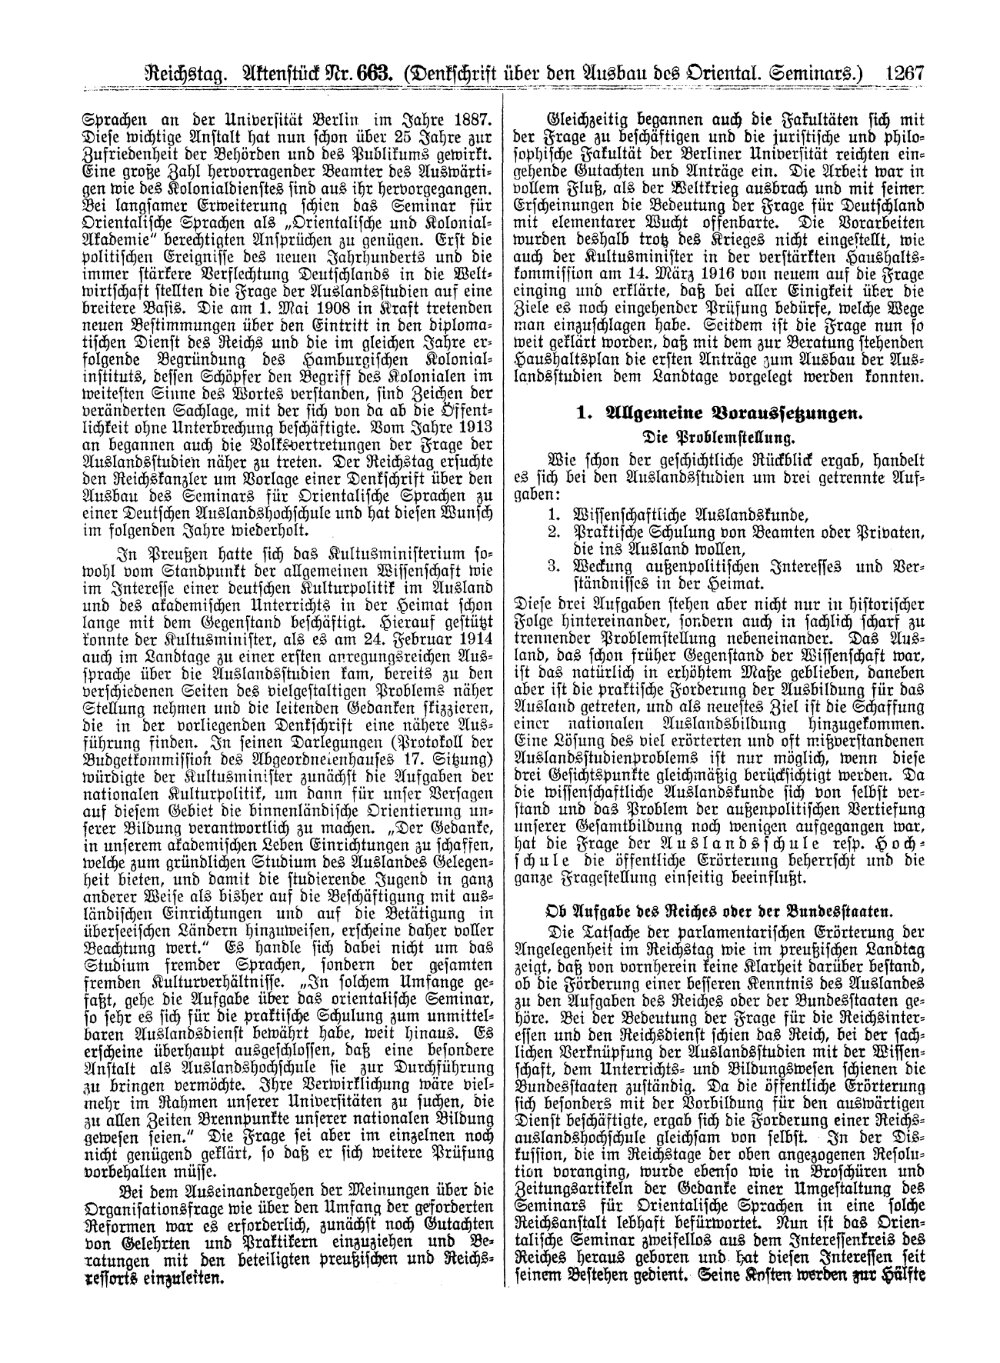 Scan of page 1267